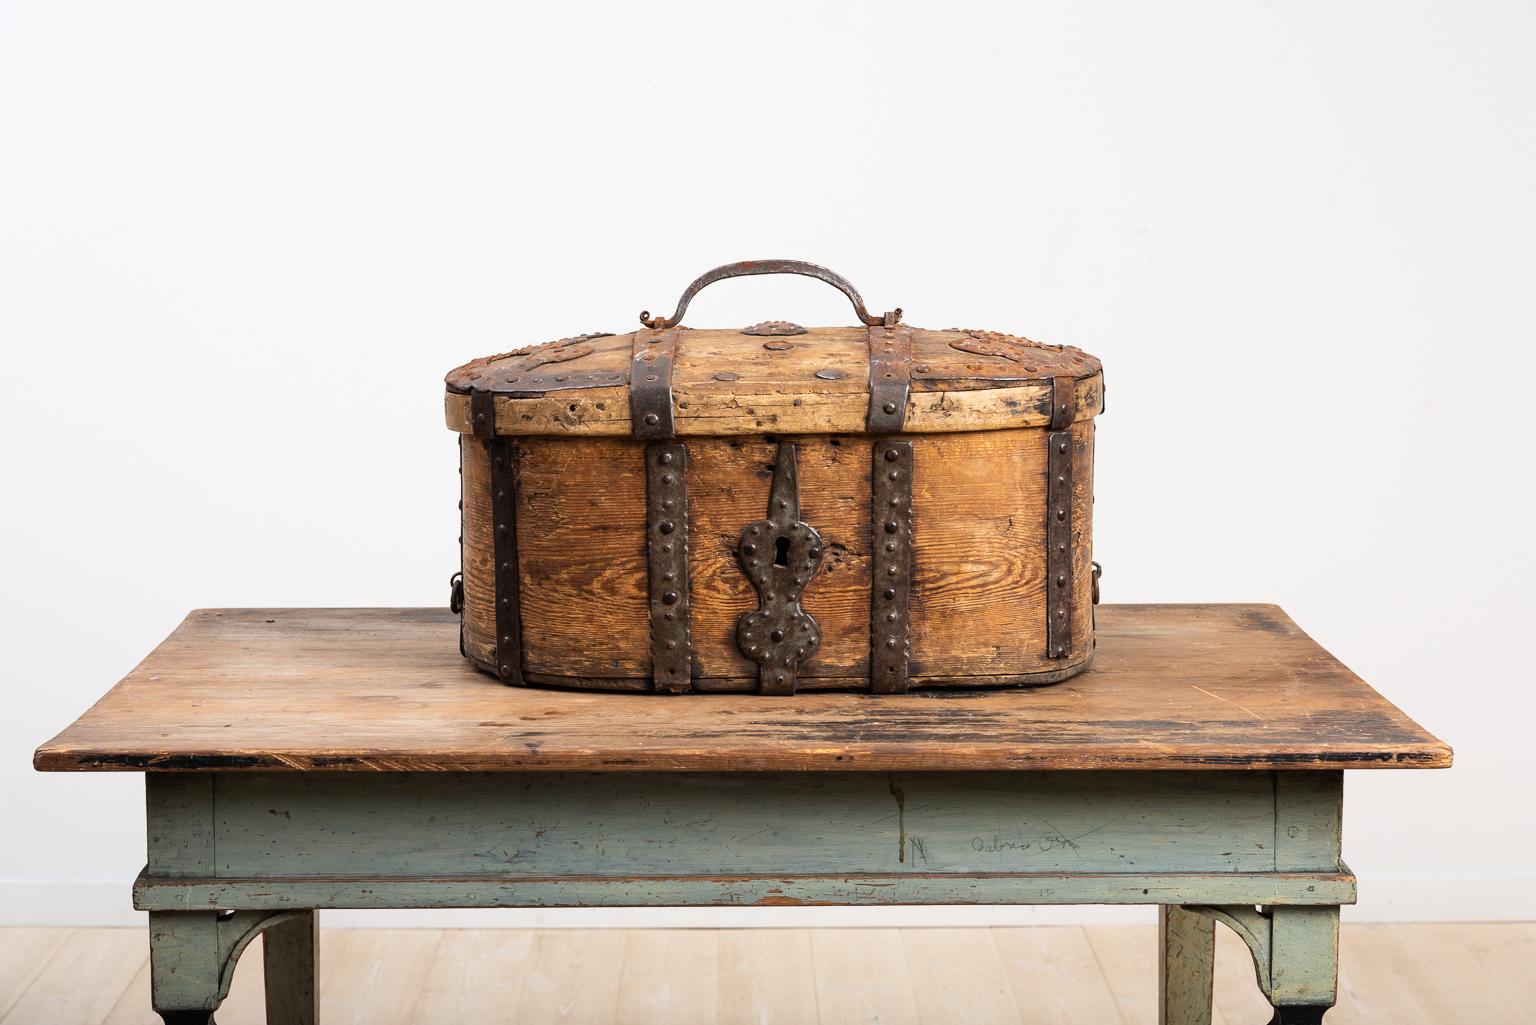 Swedish 18th century wooden travel box manufactured from pine. The box has decorative as well as functional enforcements in handwrought iron. The condition is original and the great patina adds to the look. The box was manufactured in Sweden during